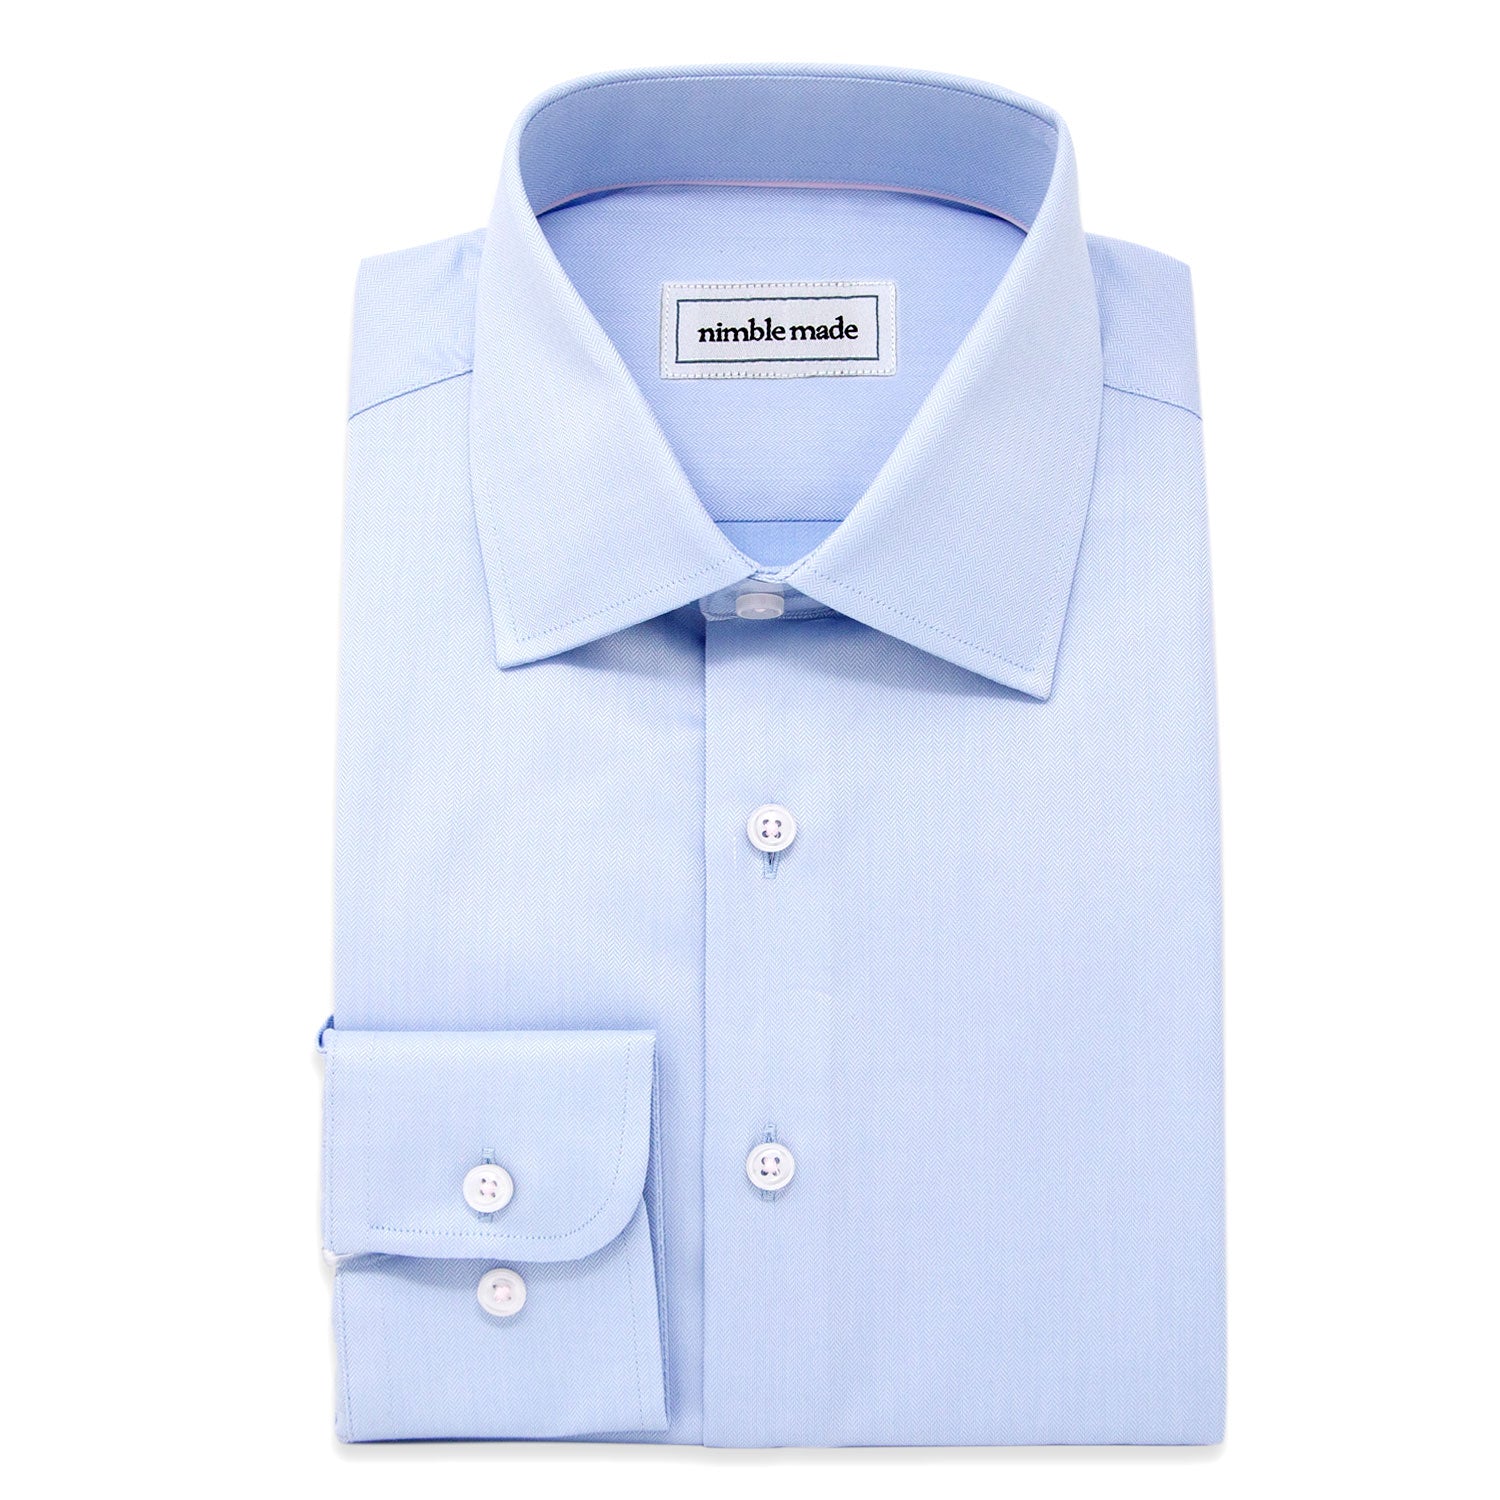 light blue dress shirt for men in slim fit by nimble made